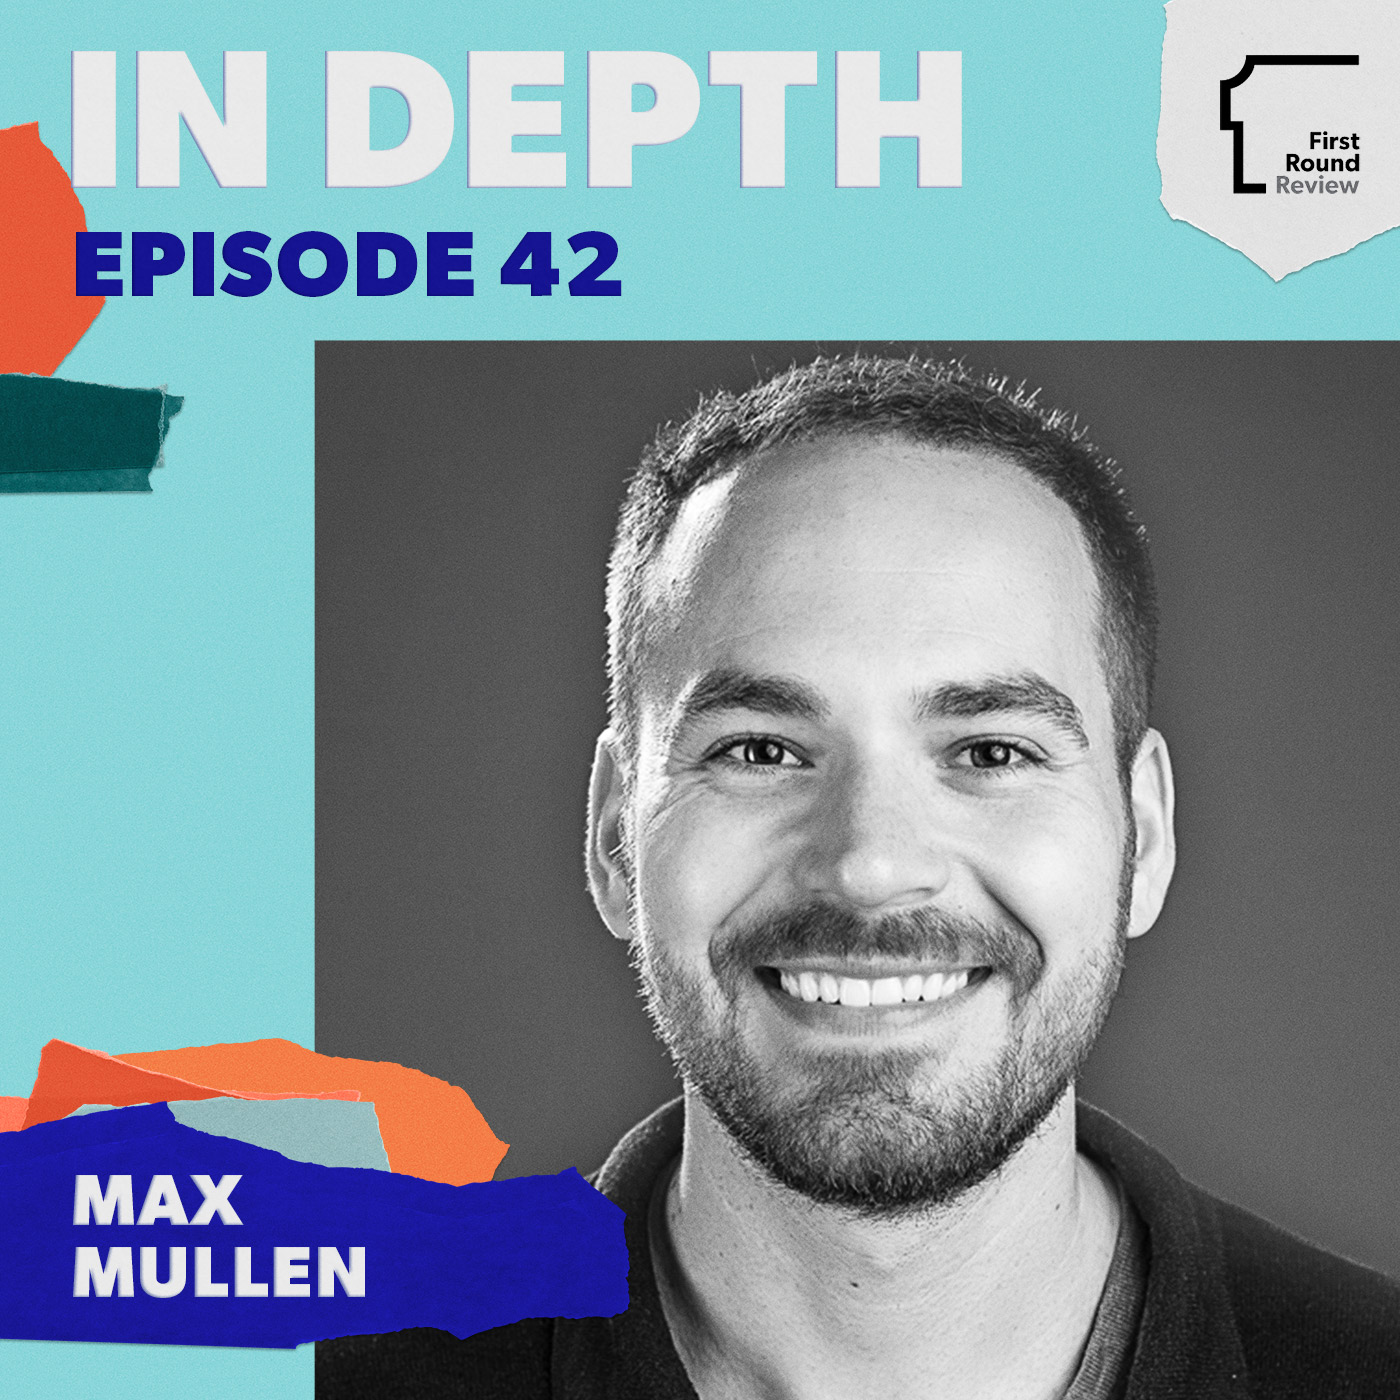 Instacart co-founder Max Mullen gets tactical on crafting company values and intentionally building culture